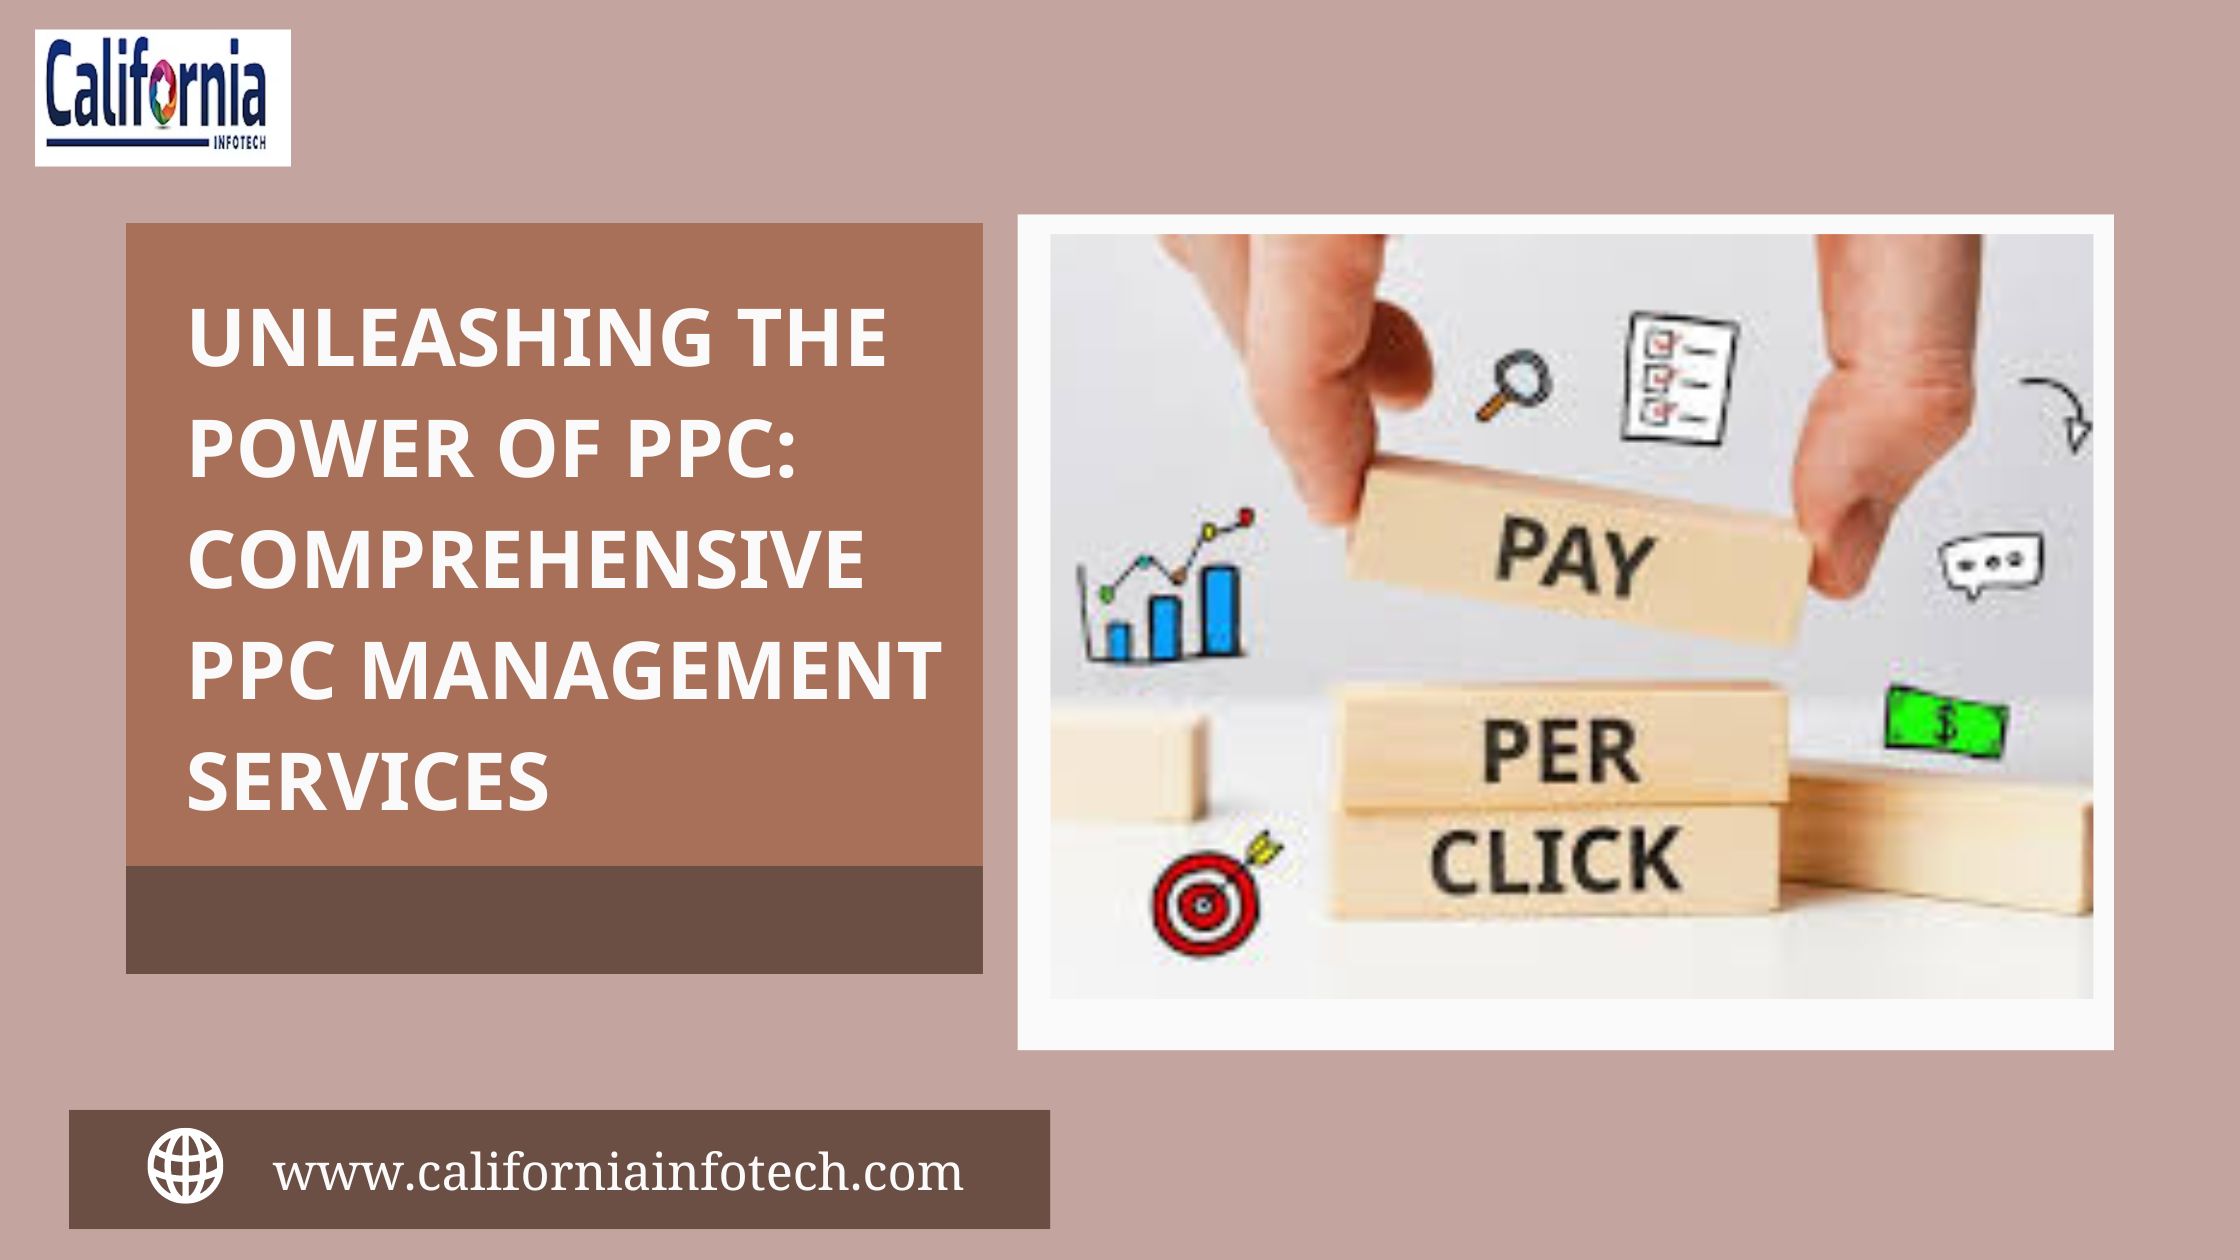 Unleashing the Power of PPC: Comprehensive PPC Management Services